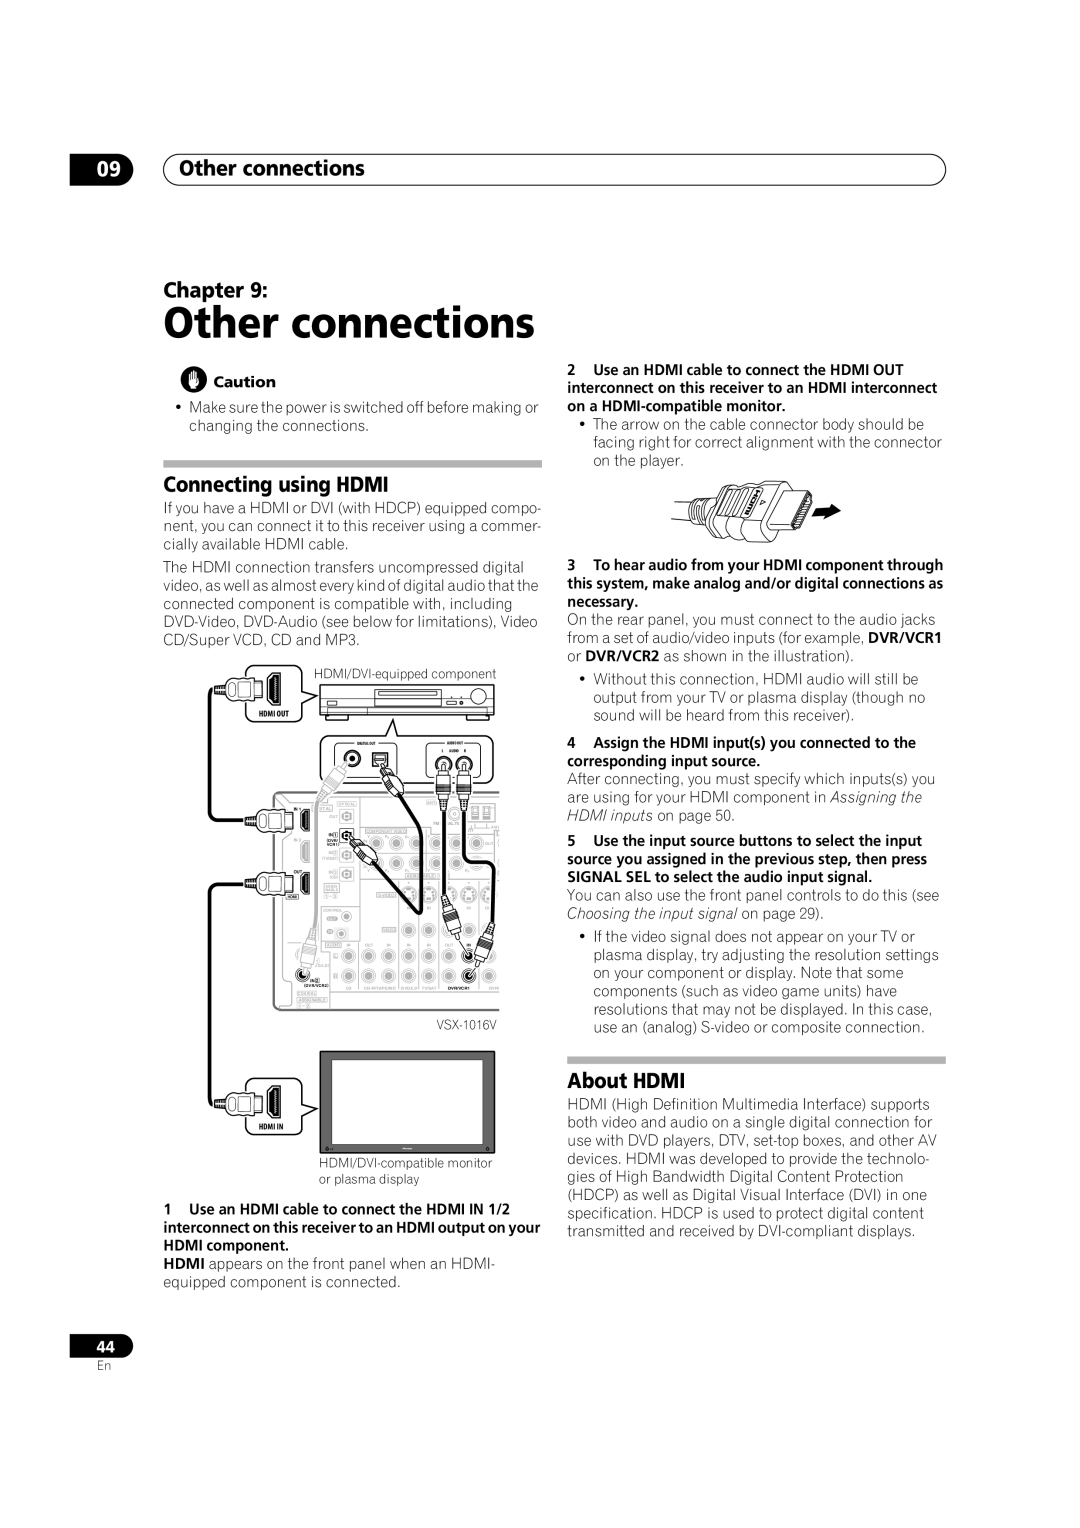 Pioneer VSX-1016V-K, VSX-1016V-S manual 09Other connections Chapter, Connecting using HDMI, About HDMI 